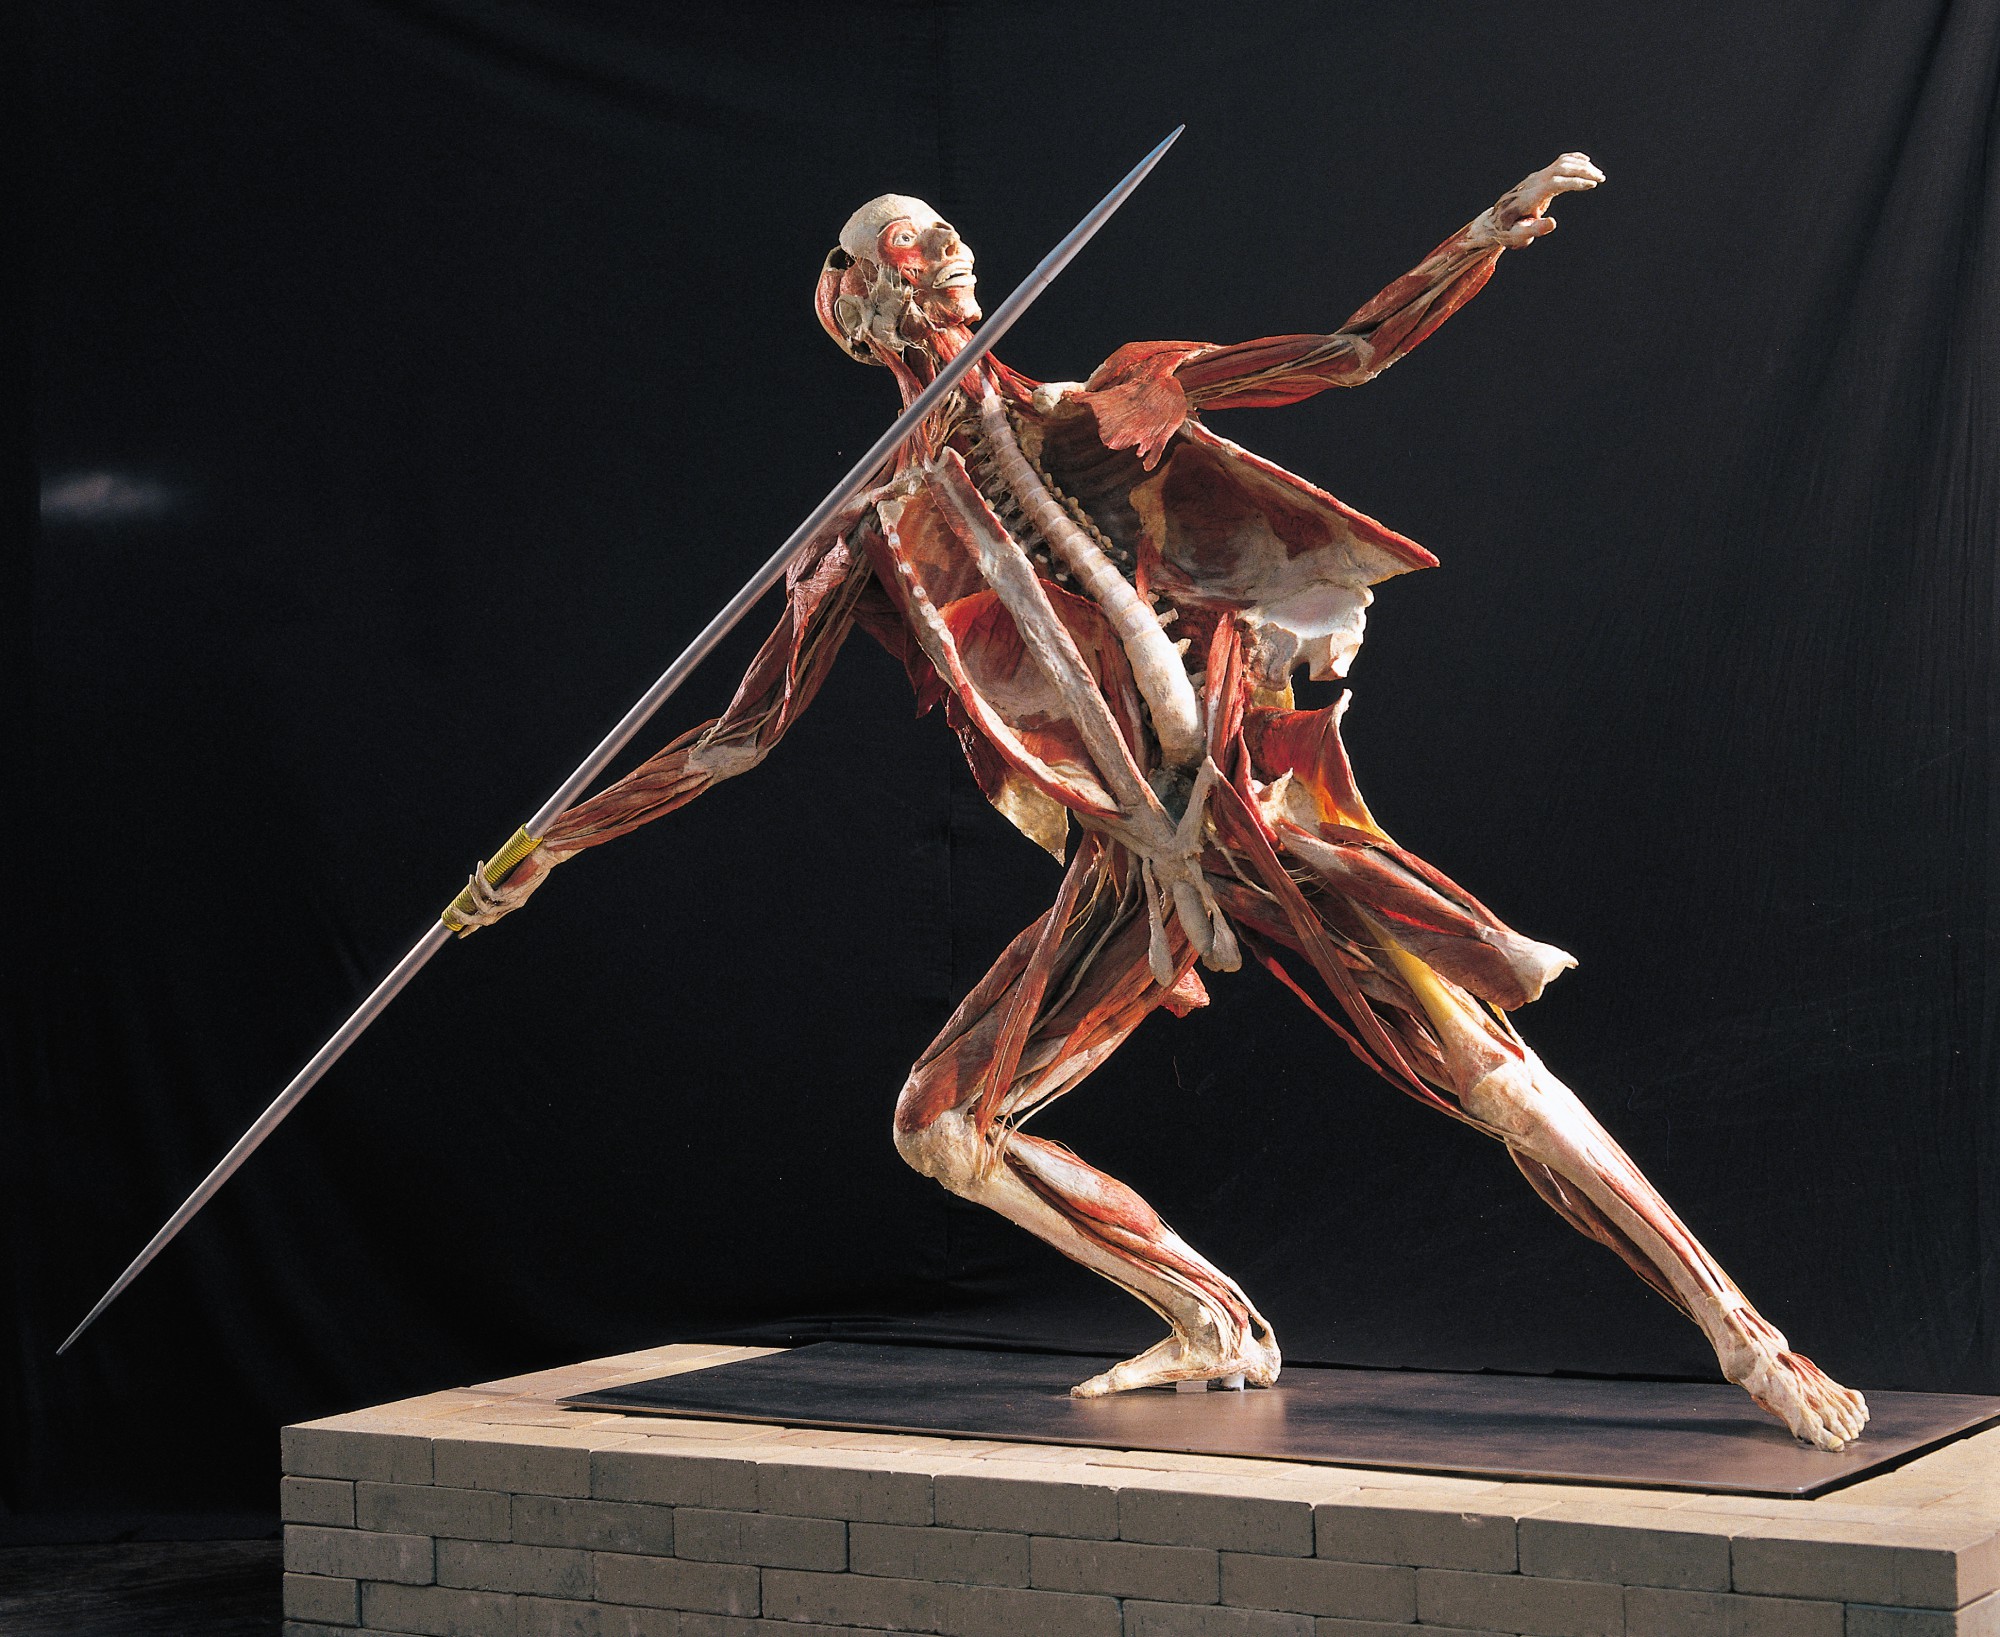 to our Body Worlds Greater Birmingham Convention & Visitors